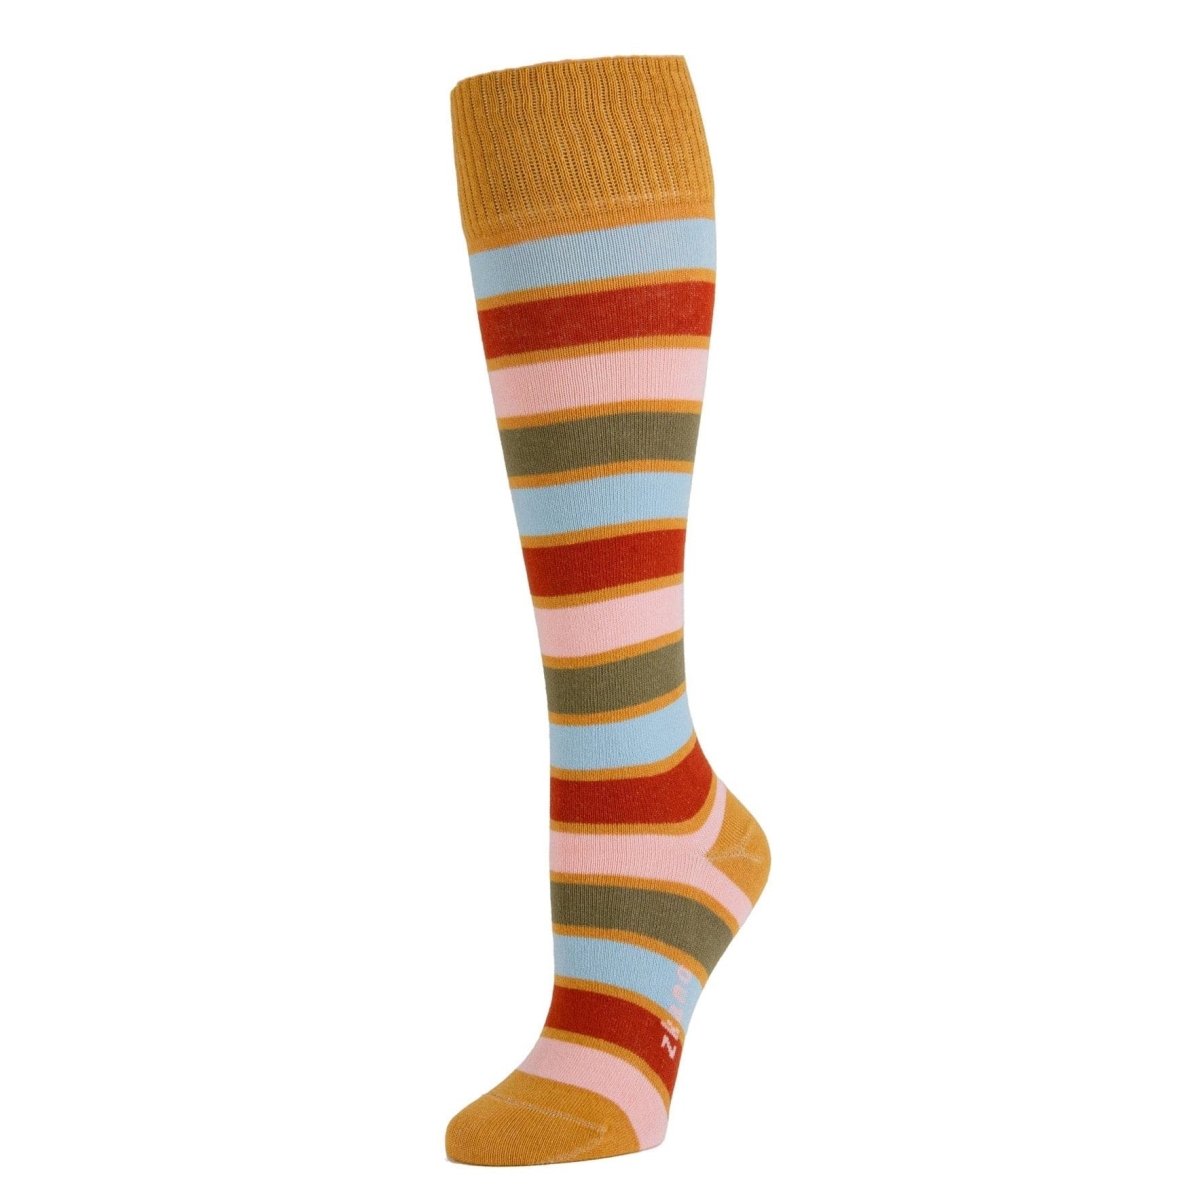 A knee high striped sock with yellow, red, pink and blue stripes. The toe and heel are a mustard yellow color. The Hazel Knee High Sock in Goldenrod Multi is from Zkano and made in Alabama, USA.